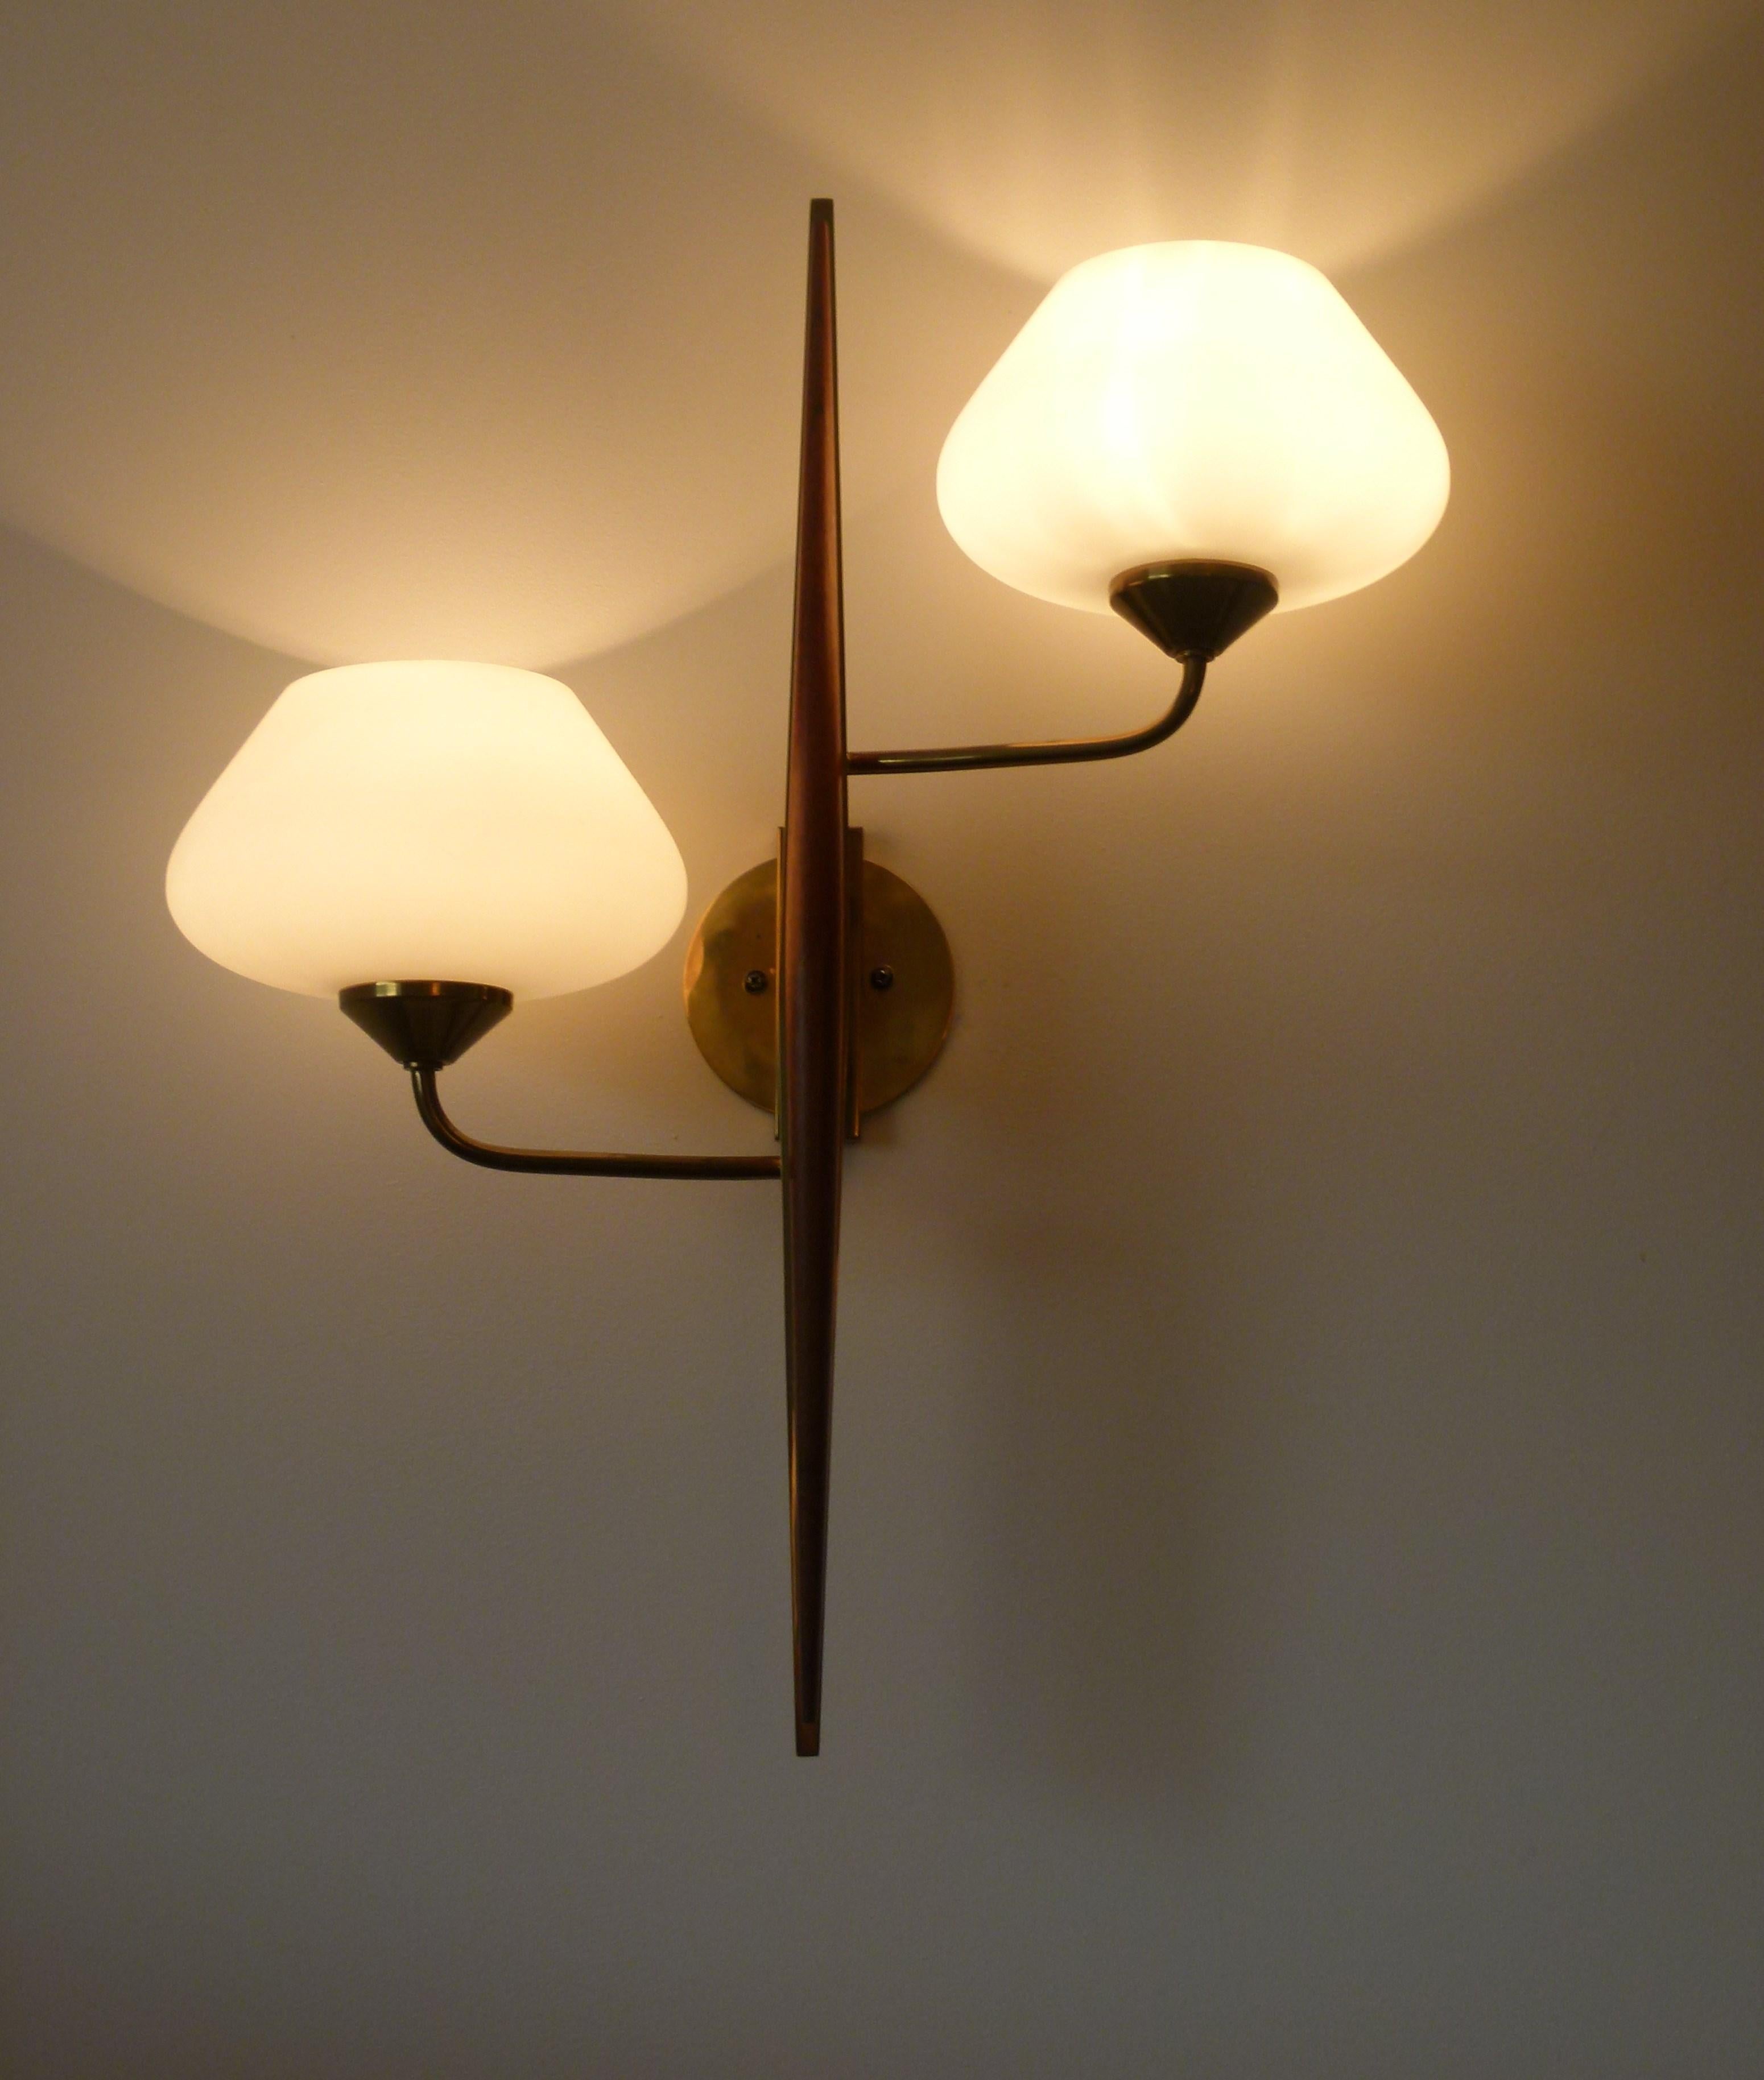 Pair of double wall sconces, consisting of a solid brass base, supported by two brass arms of light, surmounted by lampshades in frosted glass.
On the base is arranged a tapered varnished teak wood.
These sconces are in very good original